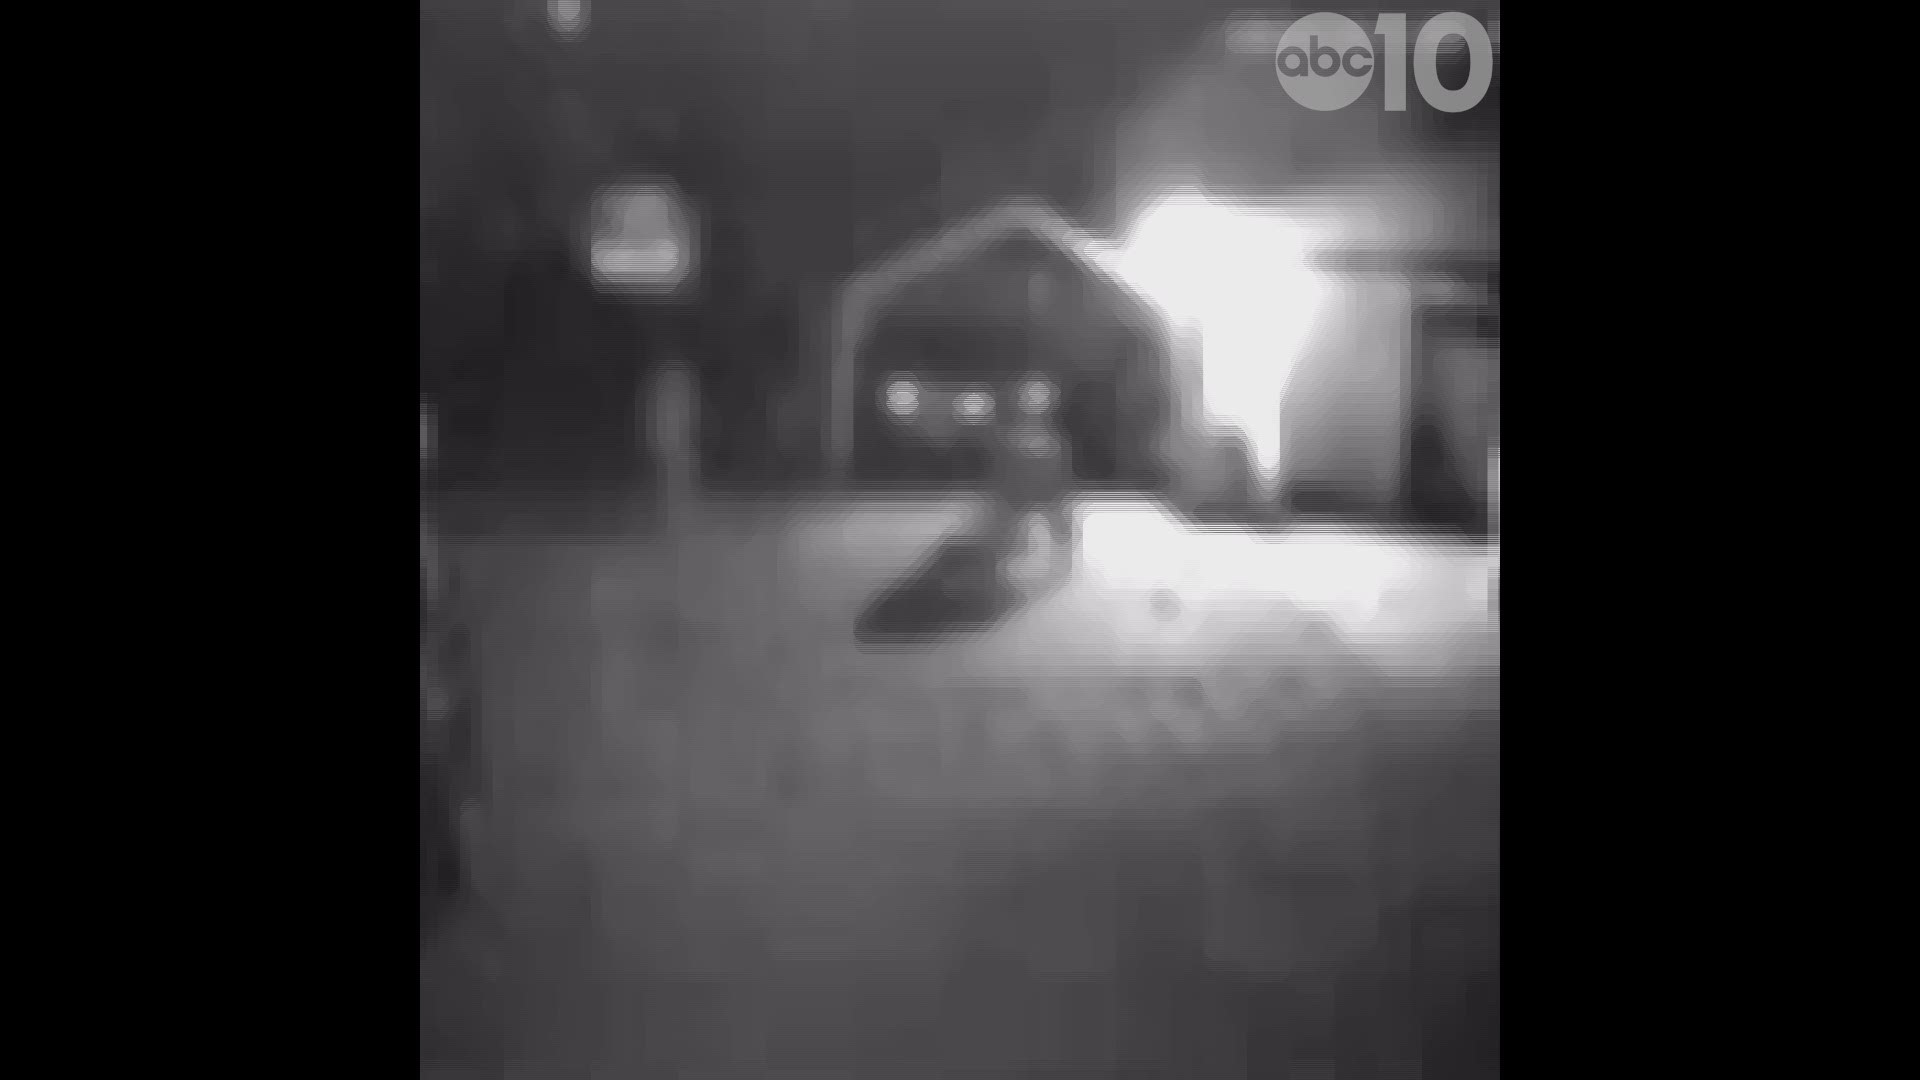 Convicted sex offender breaks into and stands in childs bedroom, captured by parents abc10 image